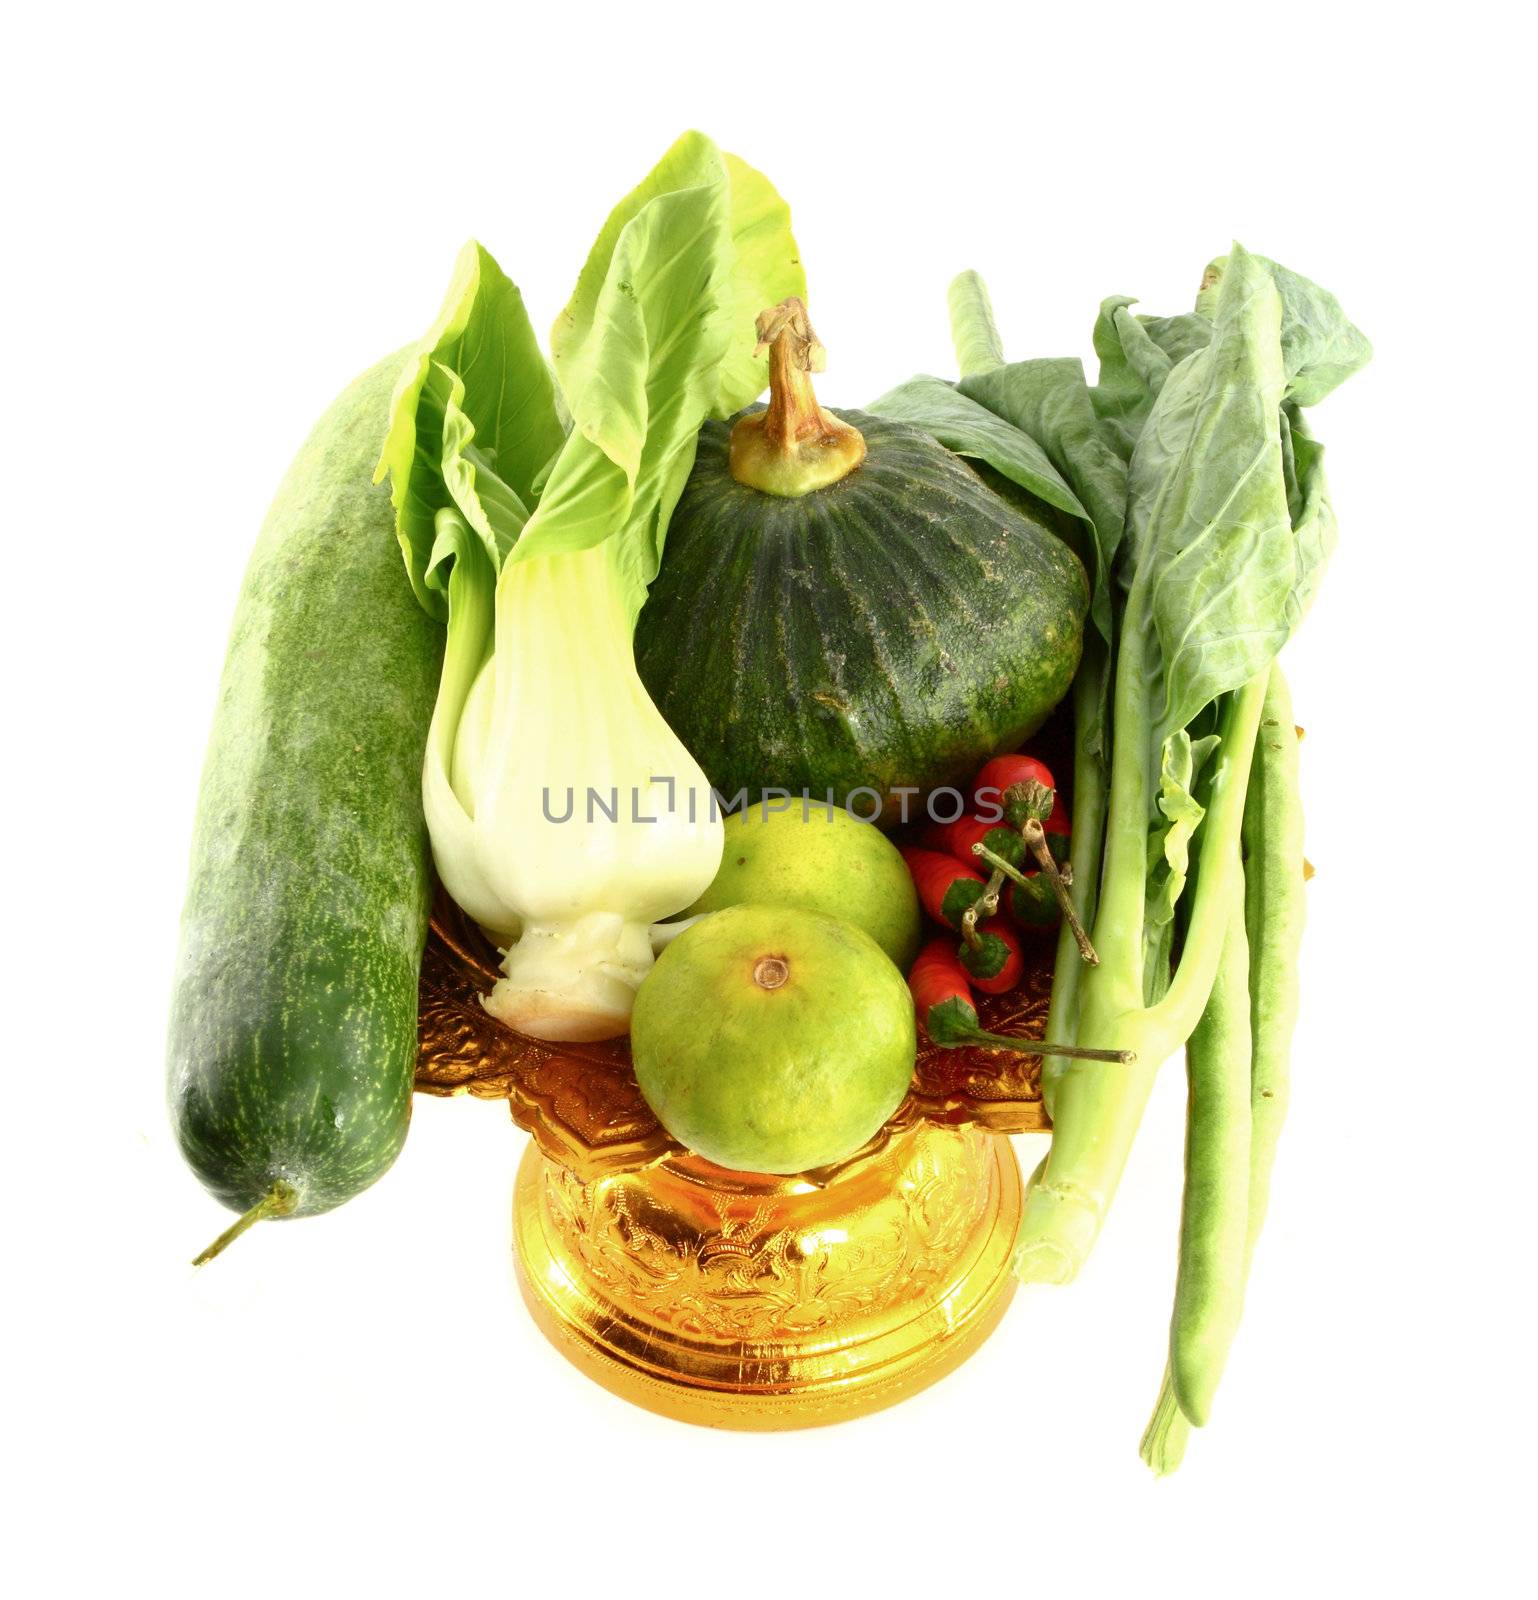 Vegetables mix on golden tray on white background by geargodz